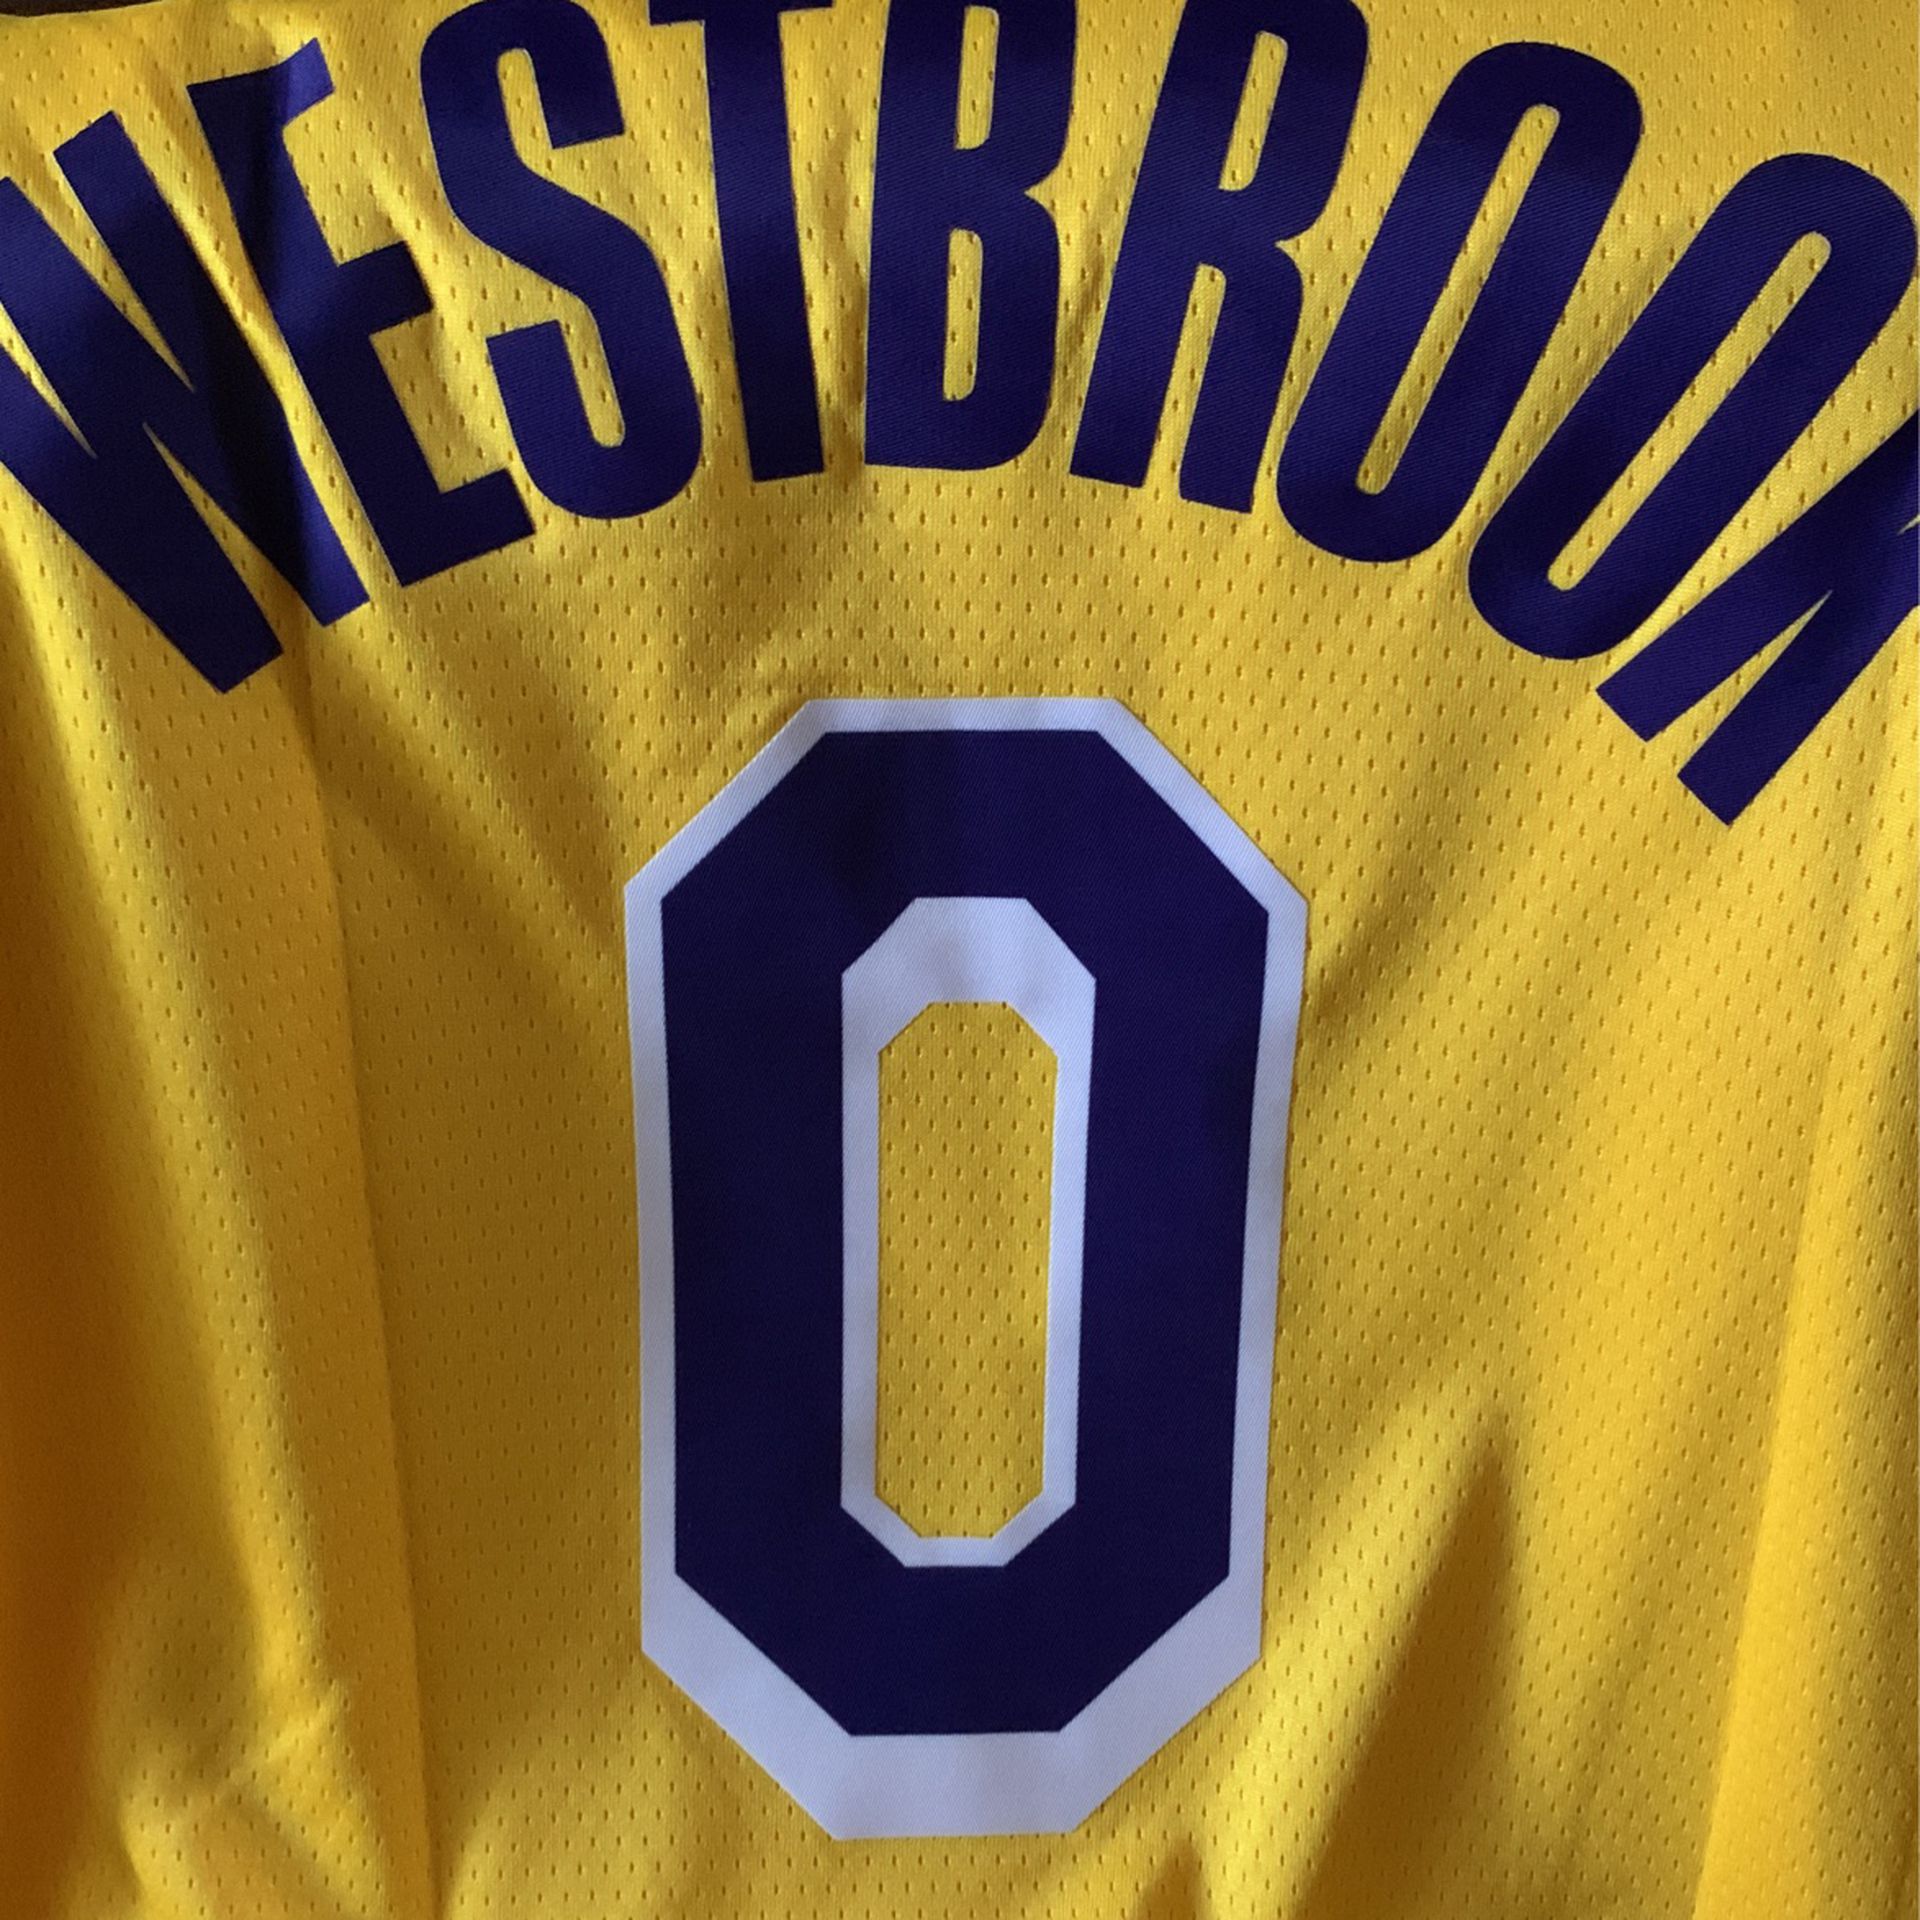 Lakers Home #0 WESTBROOK Jersey